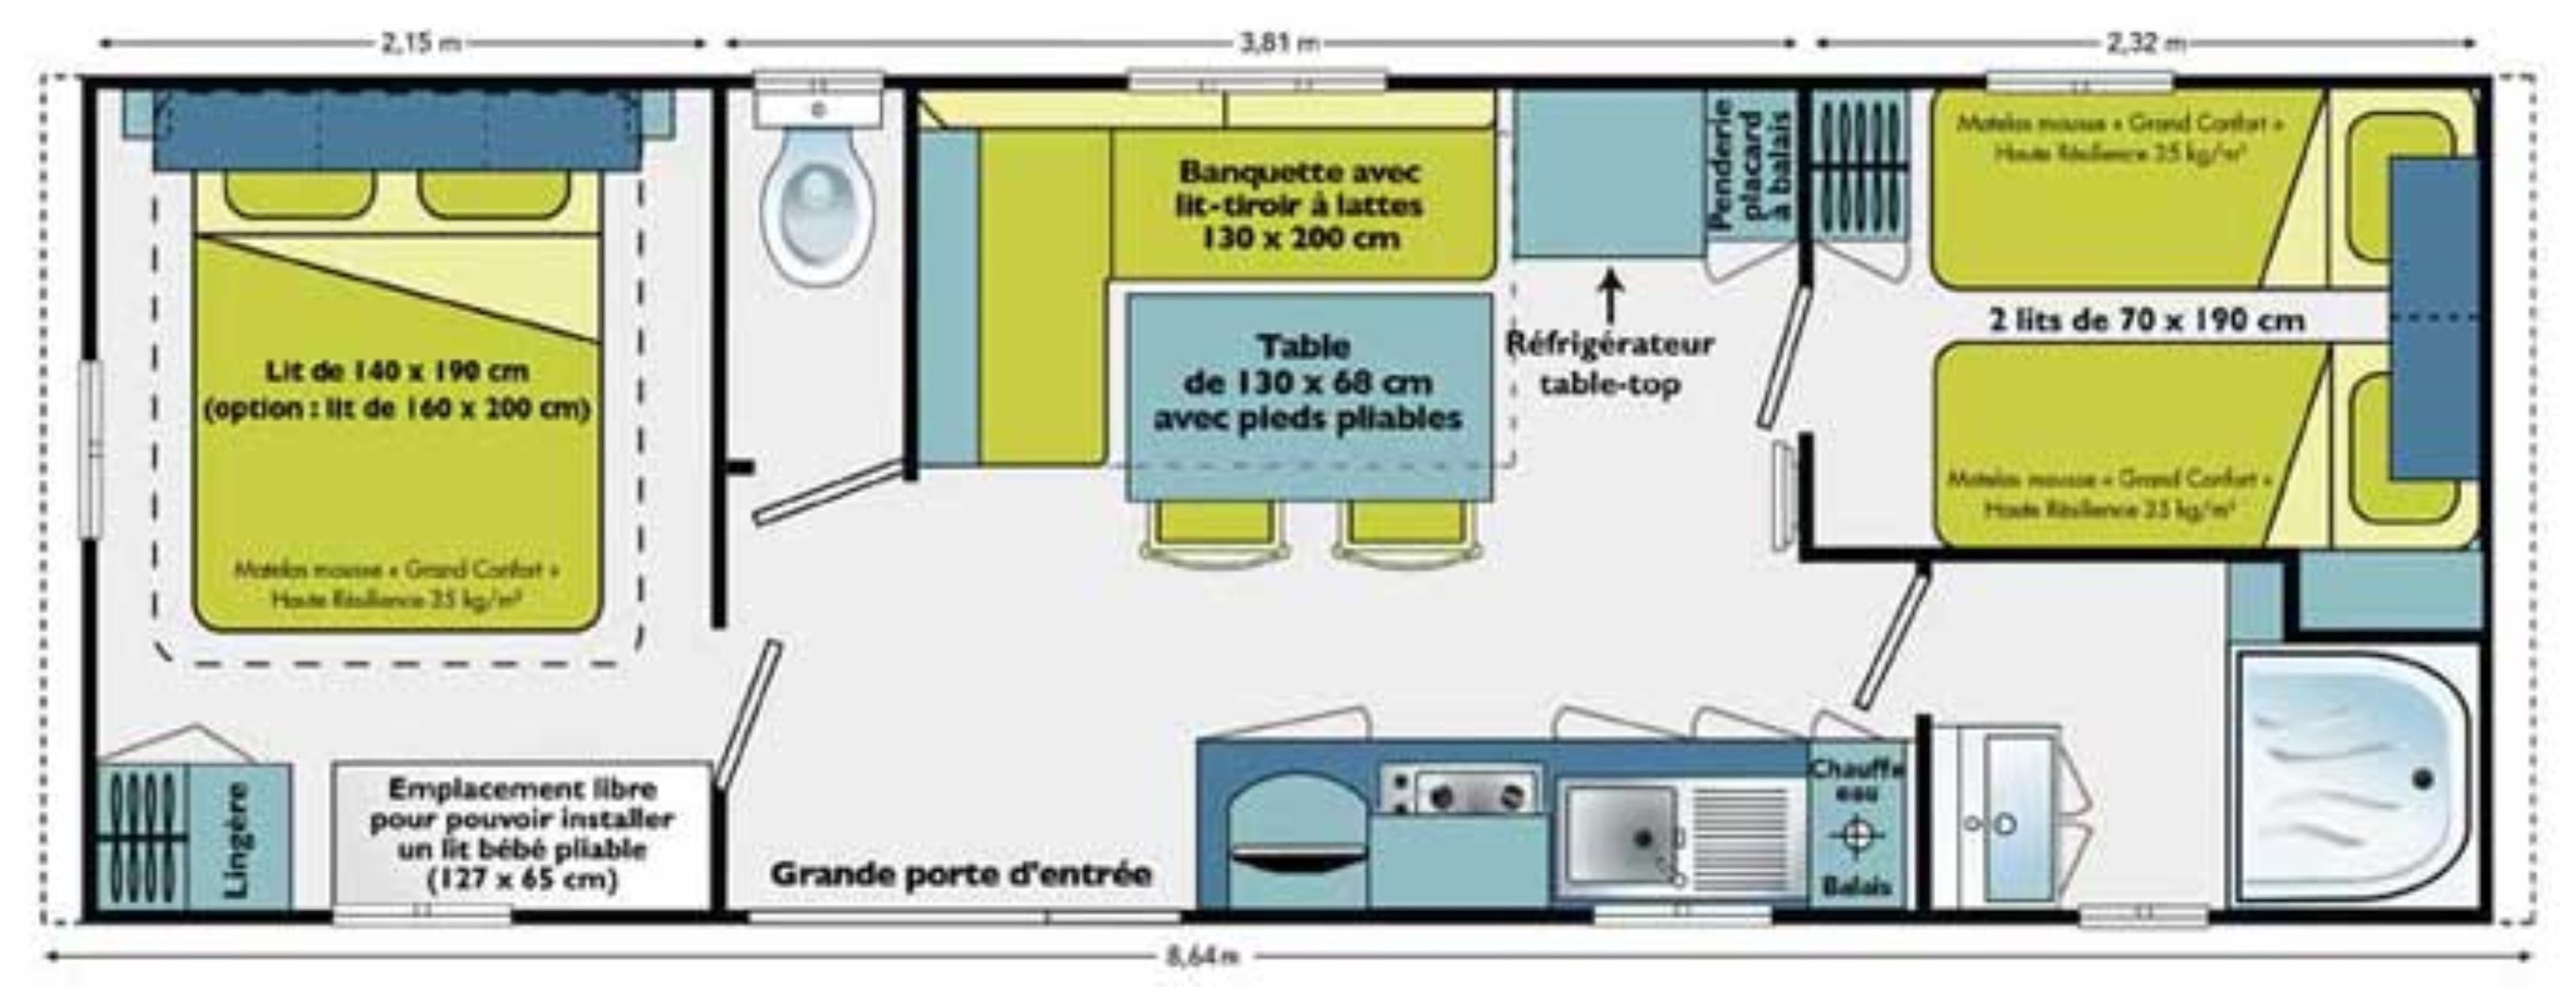 Location - Altair Confort 2 Chambres 25M2  2/4  Personnes   Vue Mer - Camping Les Lauriers Roses